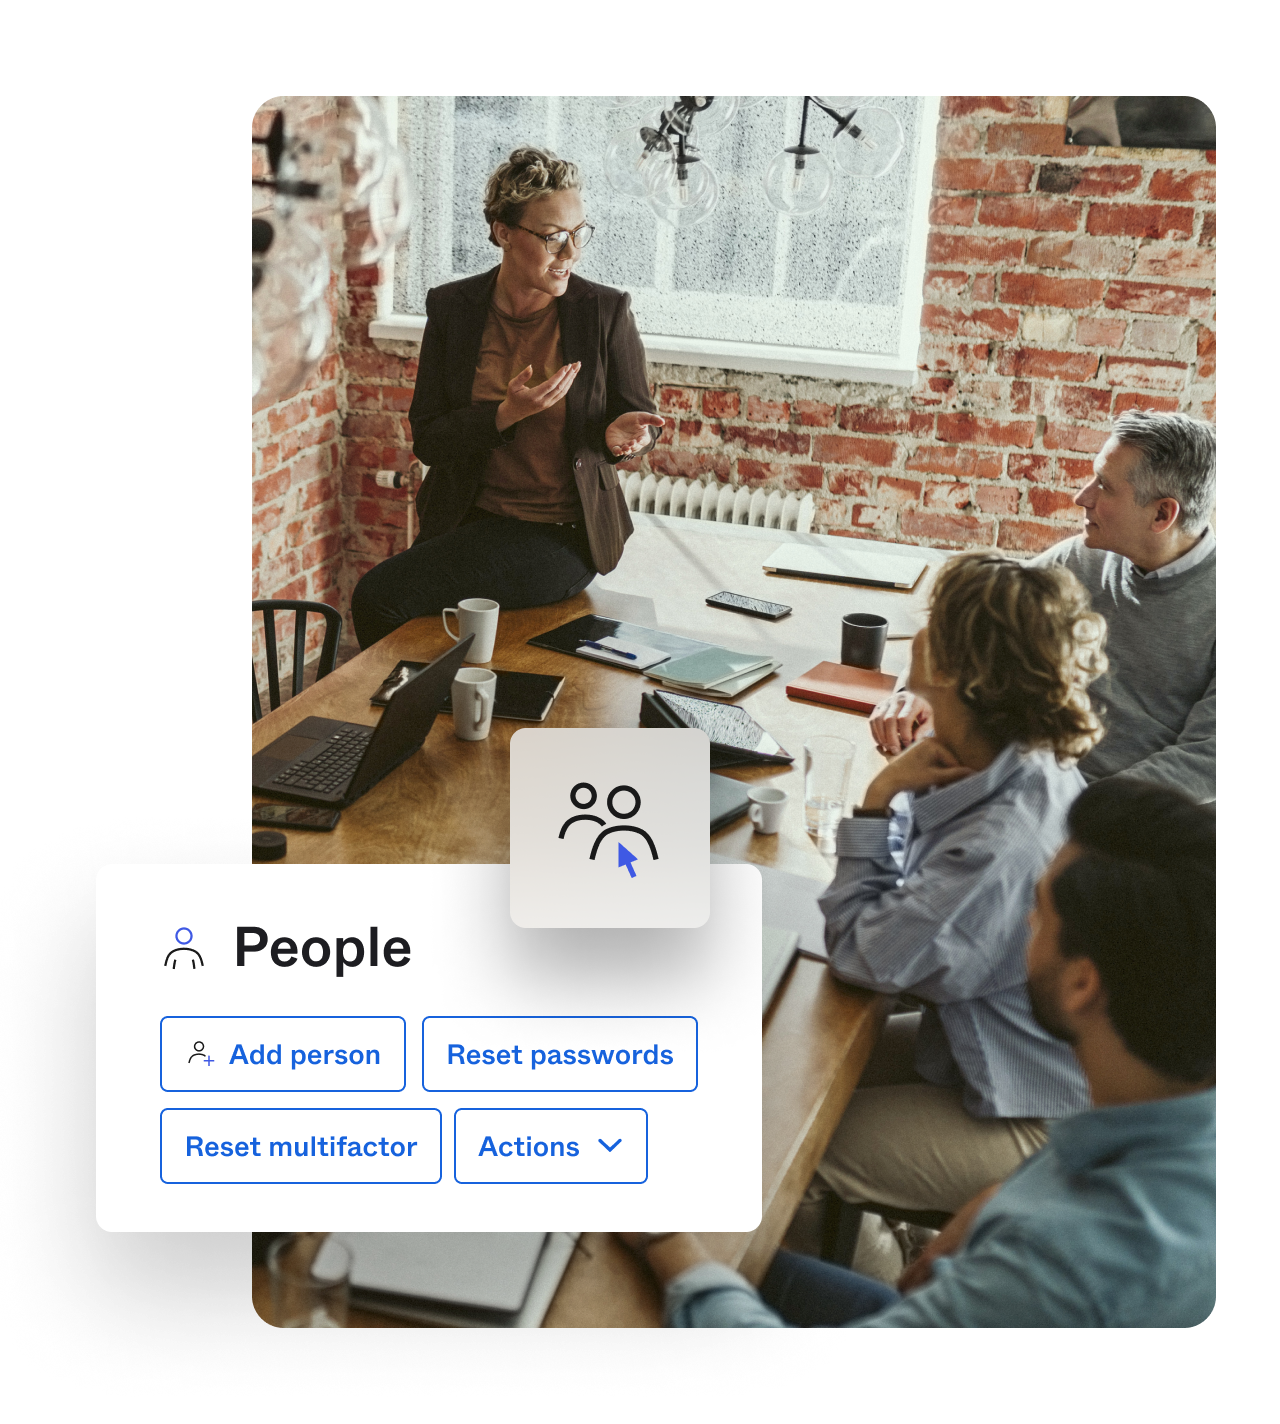 Image of user management options overlaying image of a woman having a conversation with her coworkers.